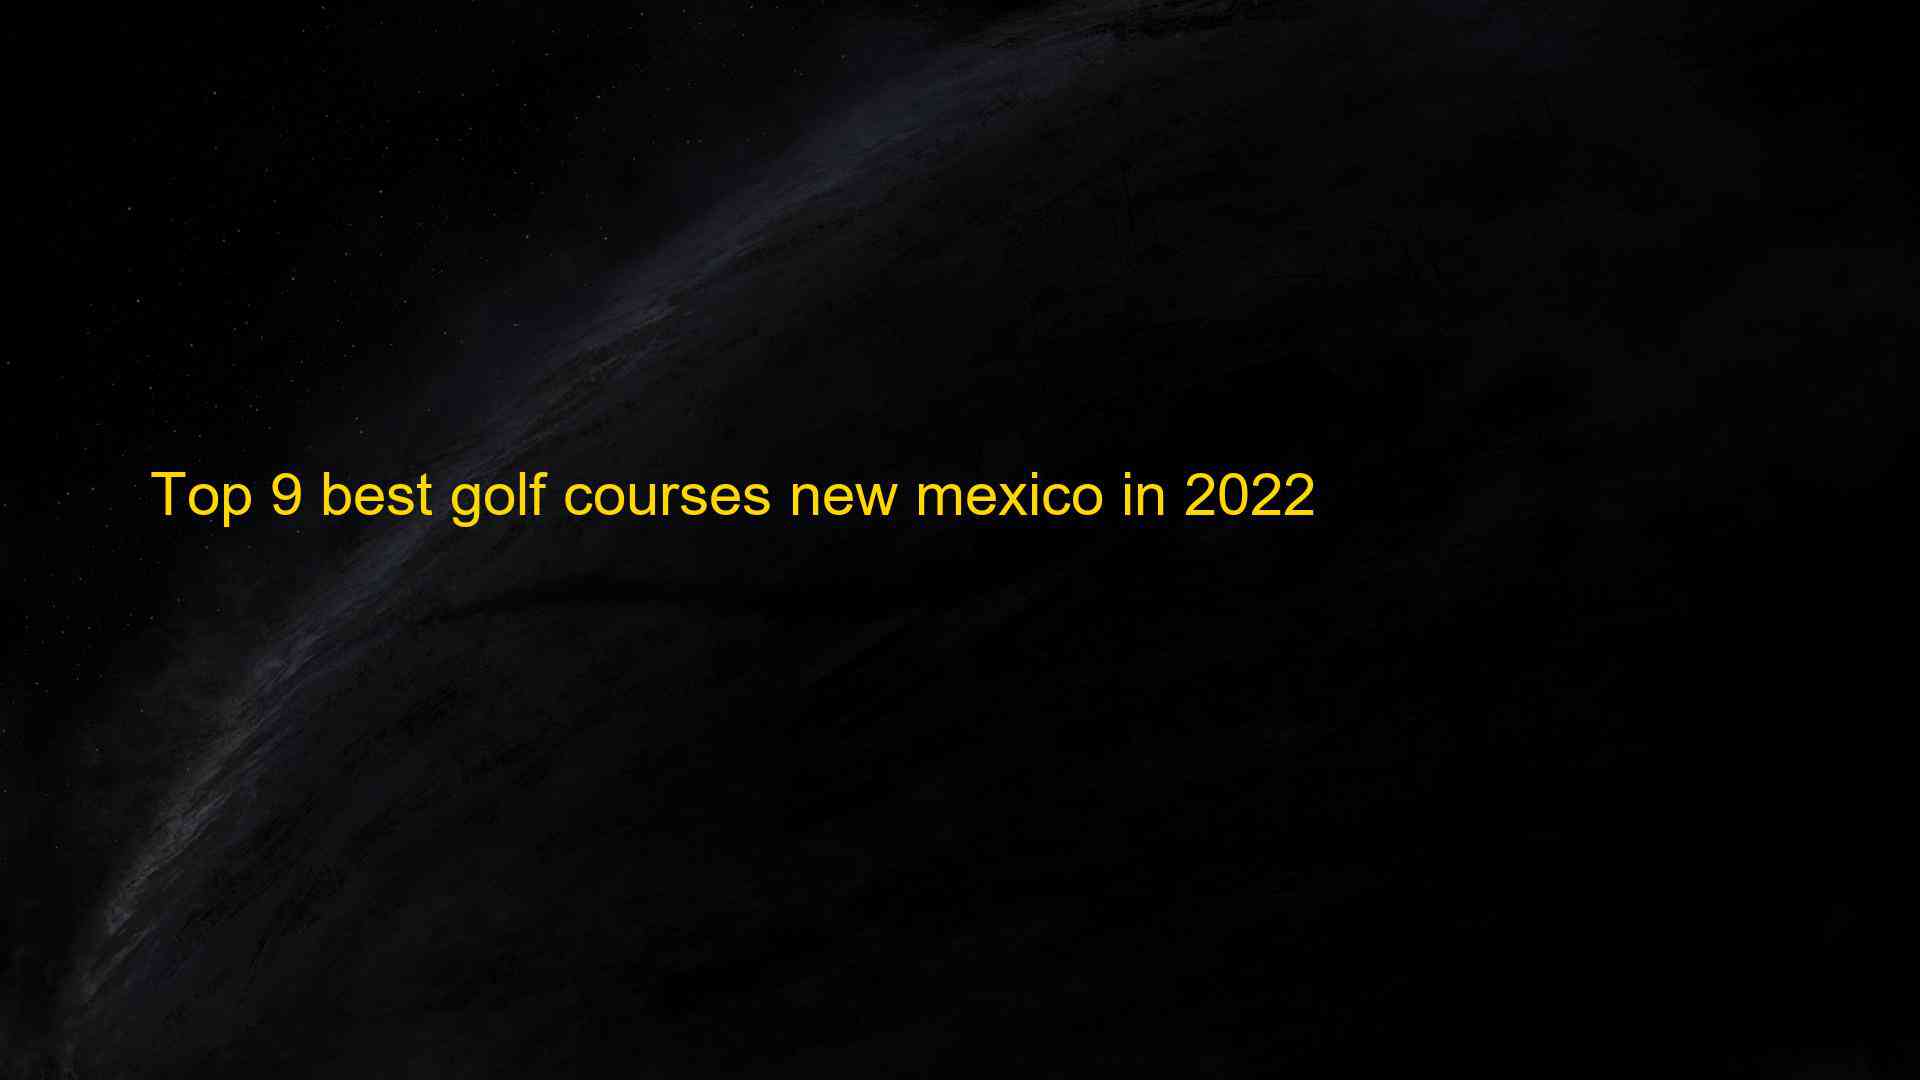 Top 9 best golf courses new mexico in 2022 1661790313